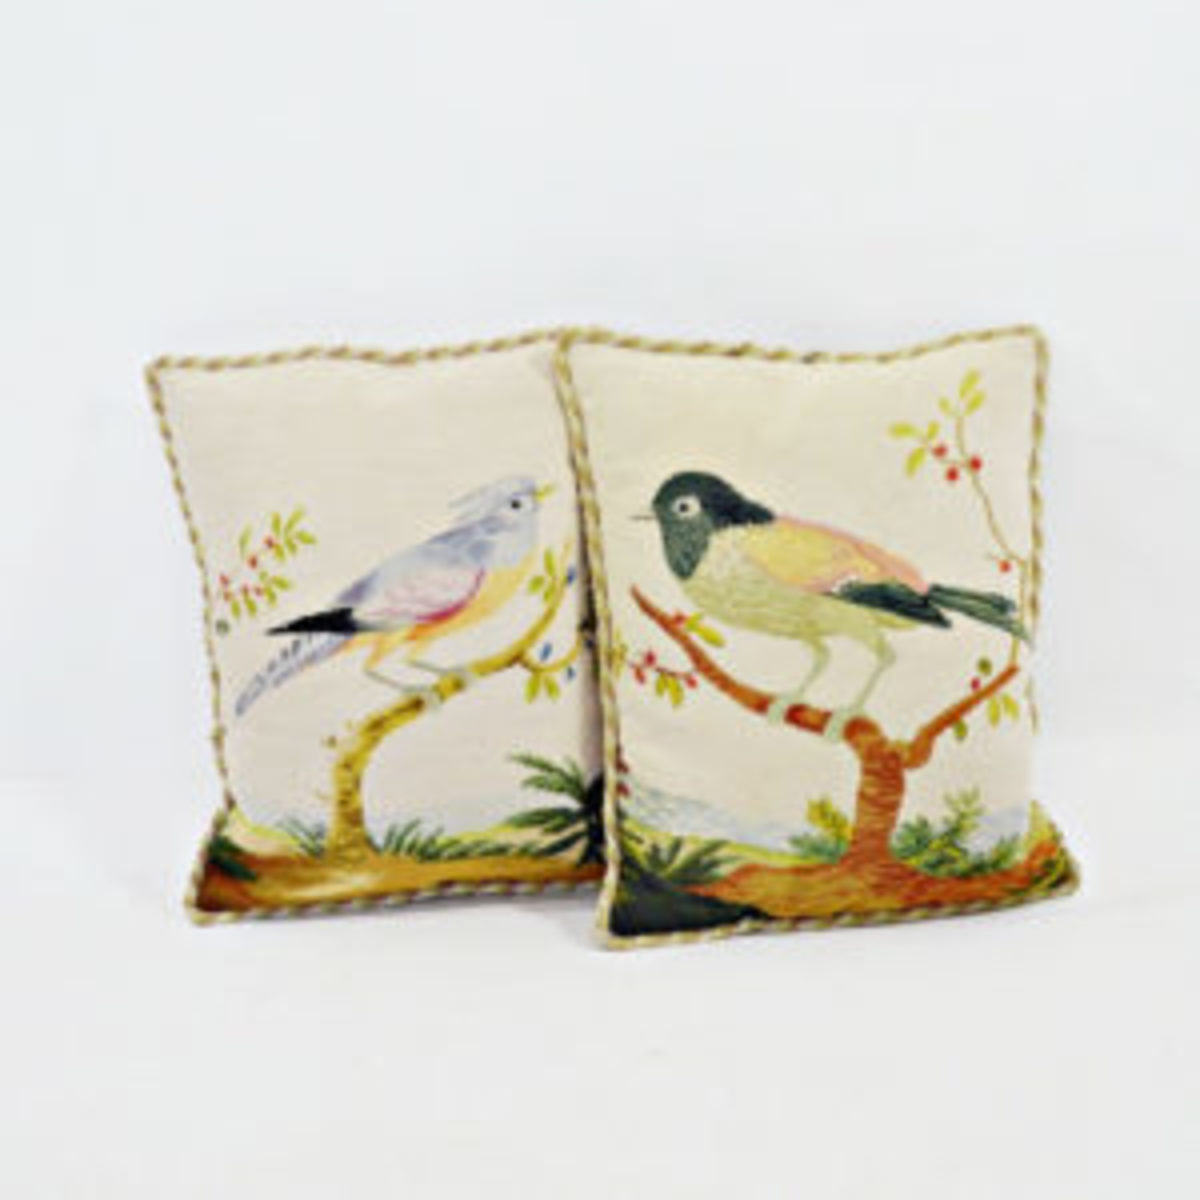 A pair of needlepoint pillows with bird designs, rope trim, dark tan cotton backing and a wool, needlepoint front with two different birds perched on branches. Includes two pillow inserts. $1,050.